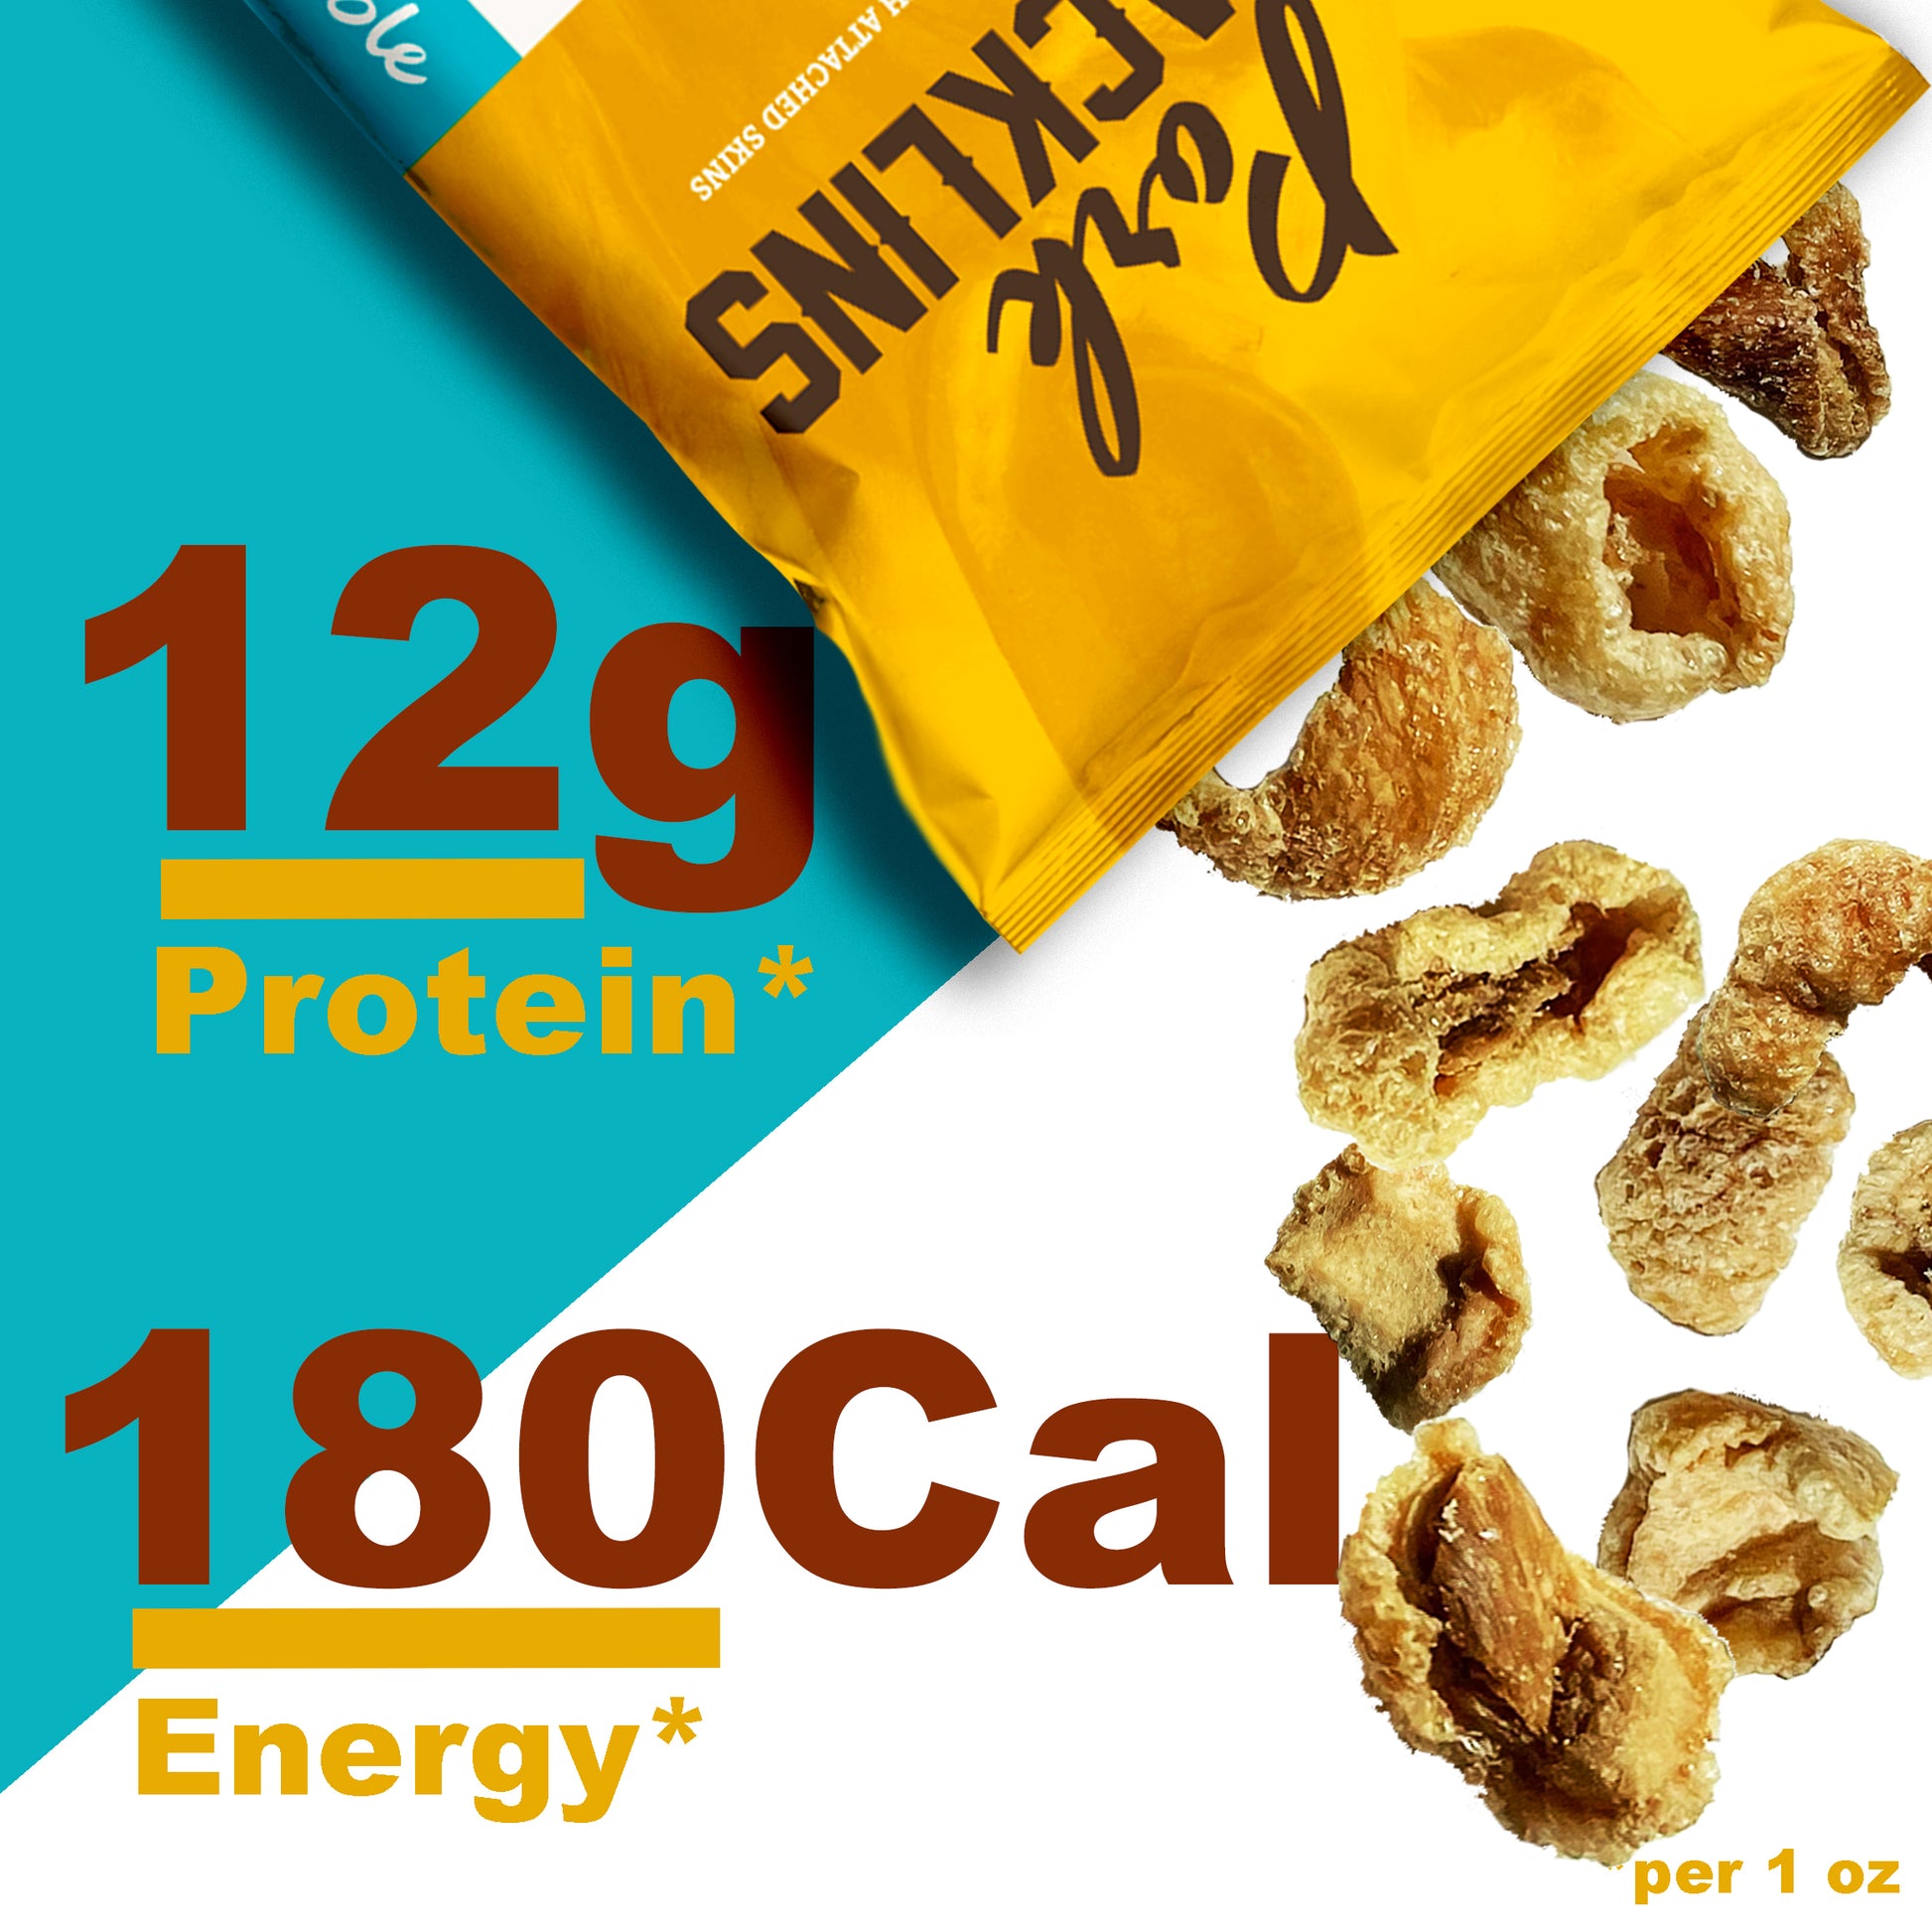 large bag of cracklings 5 ounces high protein, zero no carb, give you energy during the day. 12 gram protein per one oz. pork rinds, cracklings, cracklins 5 oz